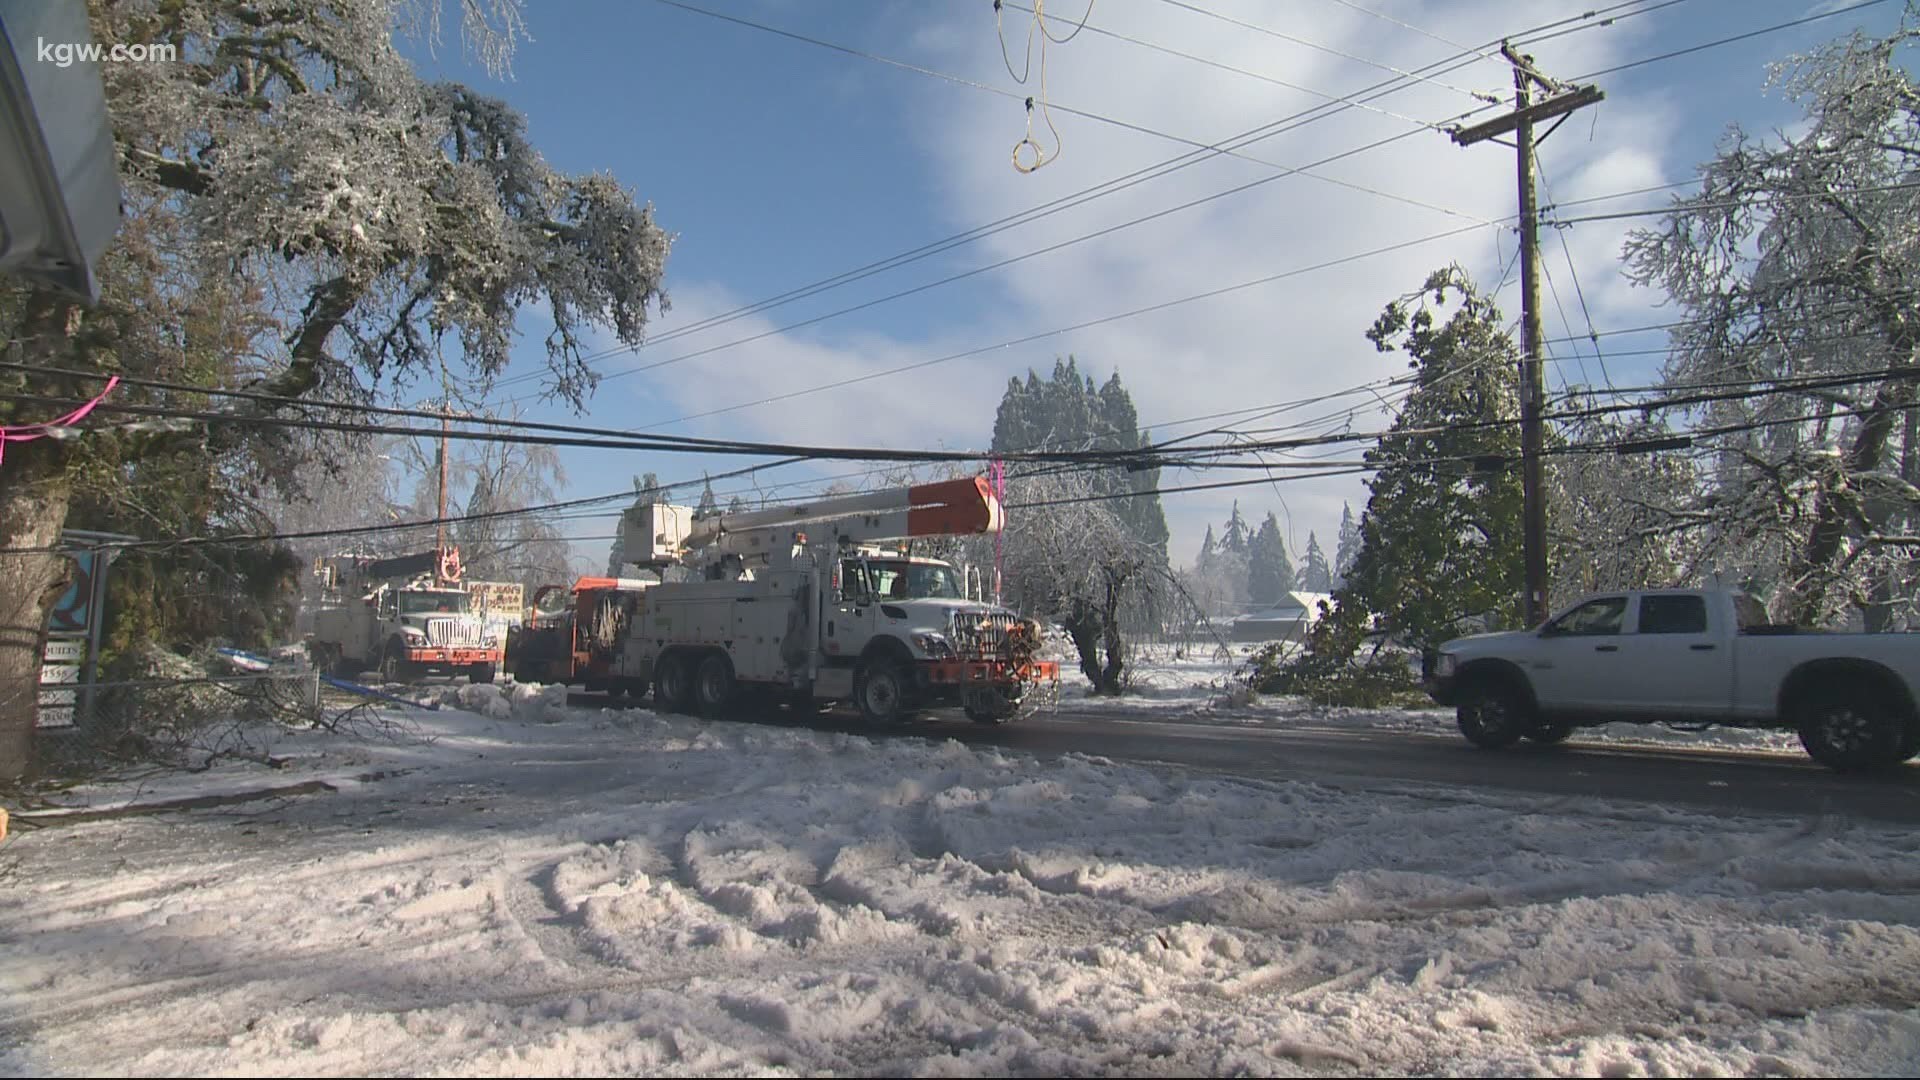 Crews are furiously working to restore power to hundreds of thousands of people after this weekend’s winter storm. Maggie Vespa has the latest.